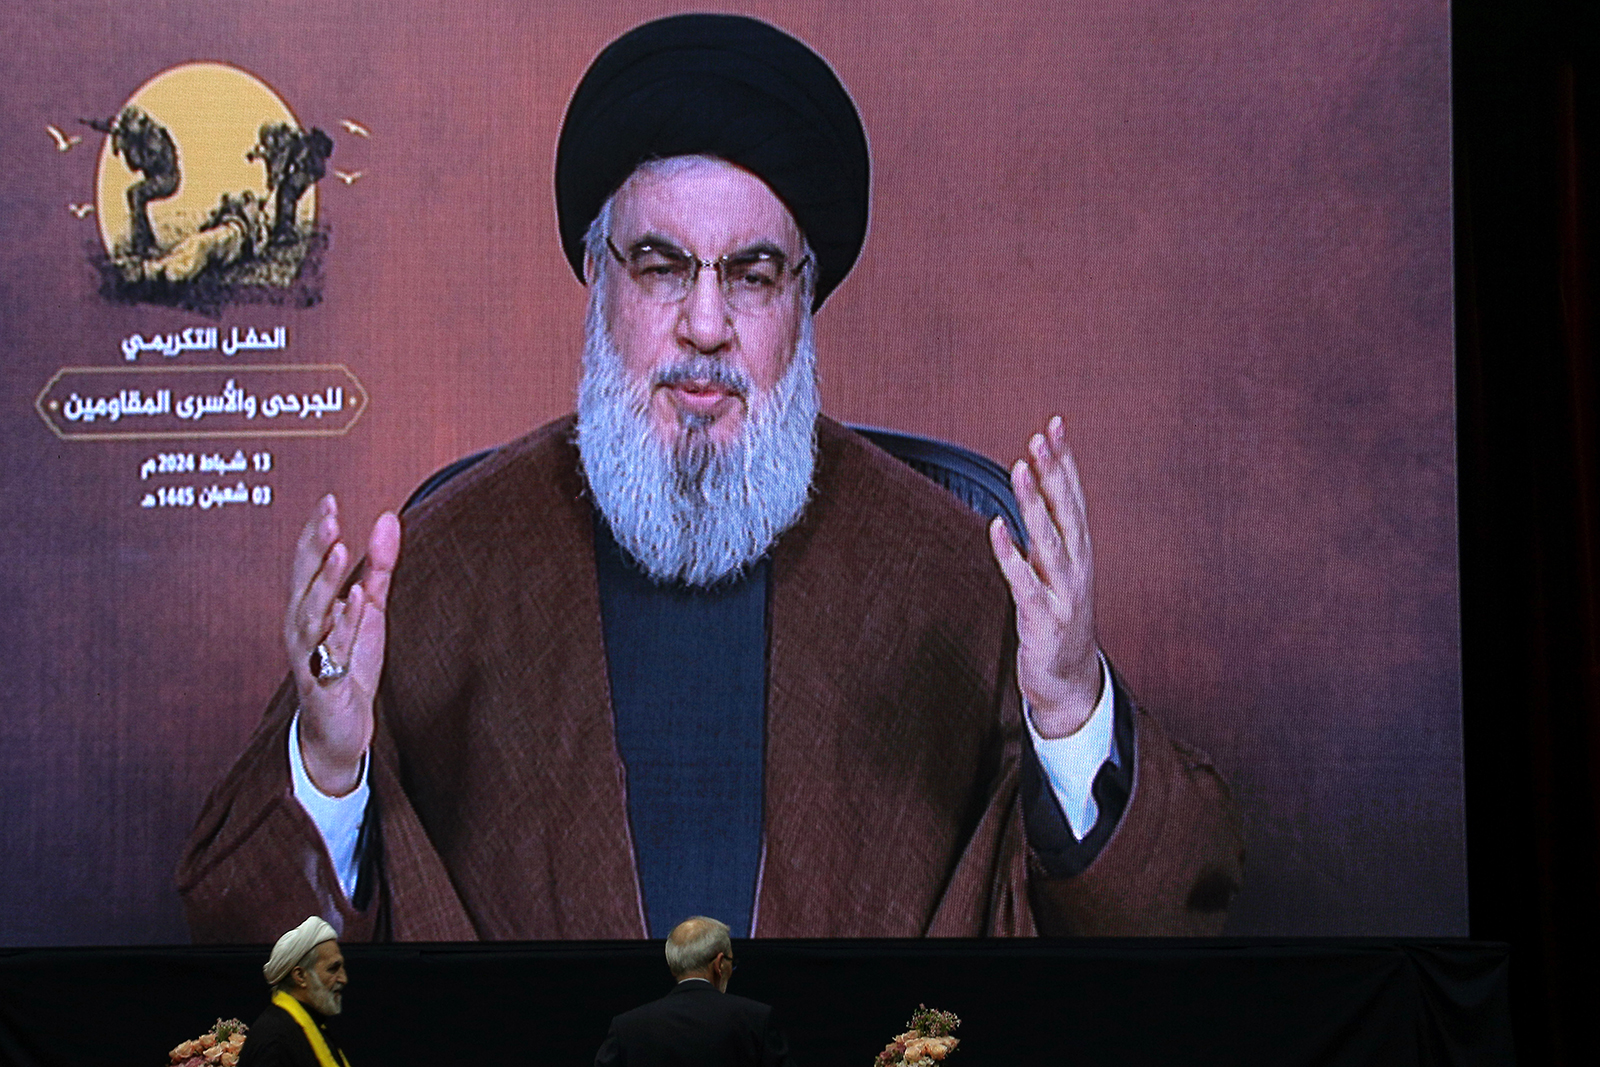 Hassan Nasrallah speaks via a video link during an event in Lebanon, Beirut on February 13.